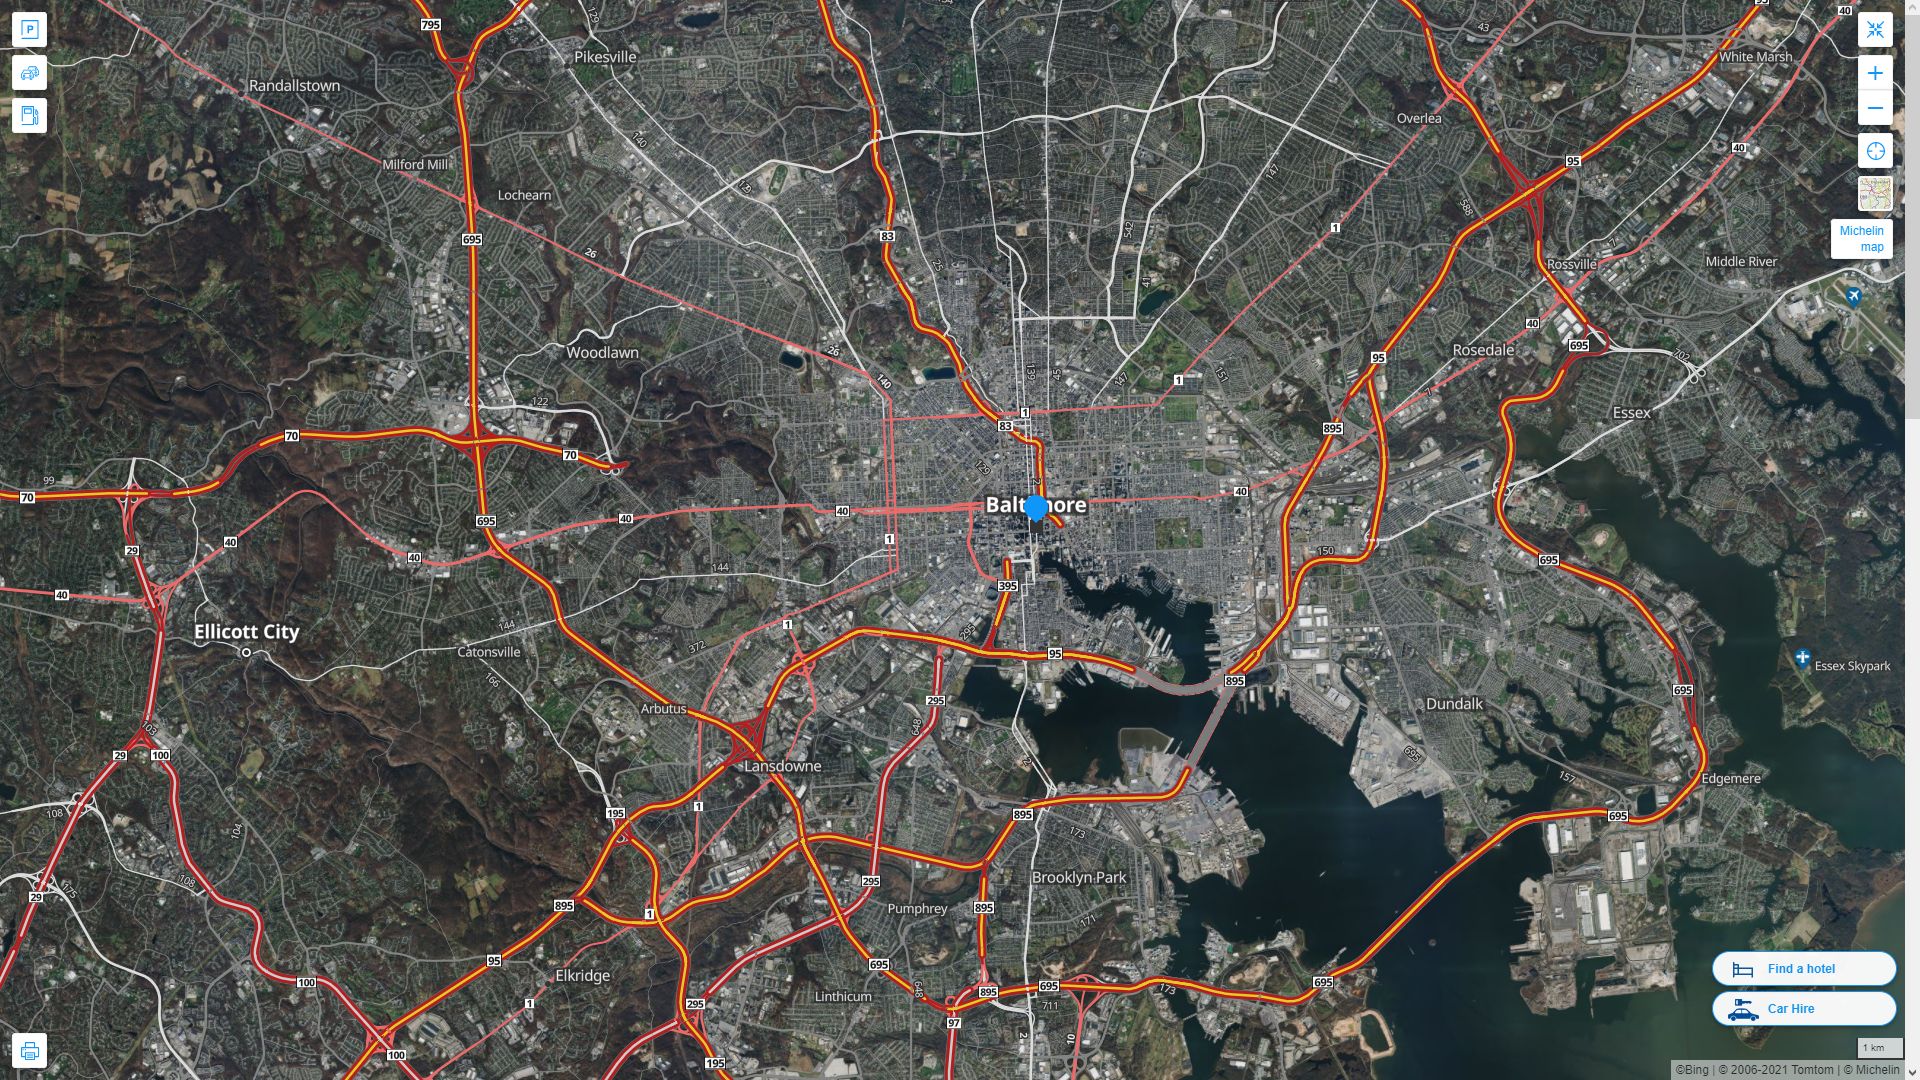 Baltimore Maryland Highway and Road Map with Satellite View